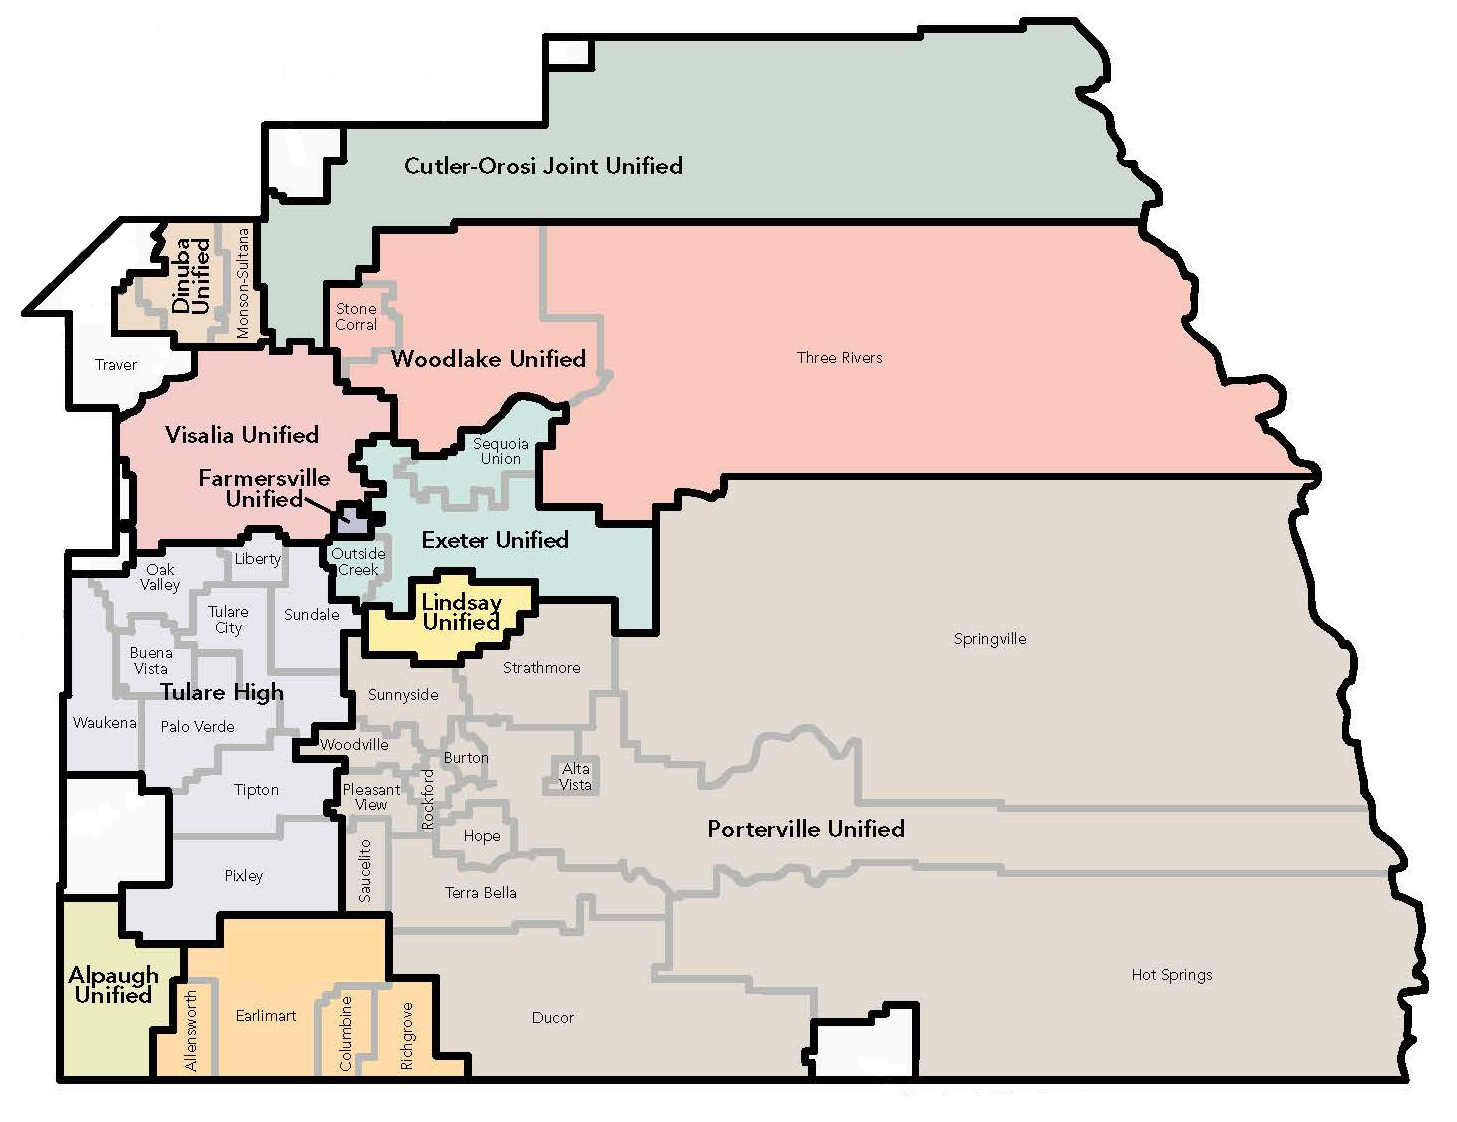 Boundaries of school districts located in Tulare County.